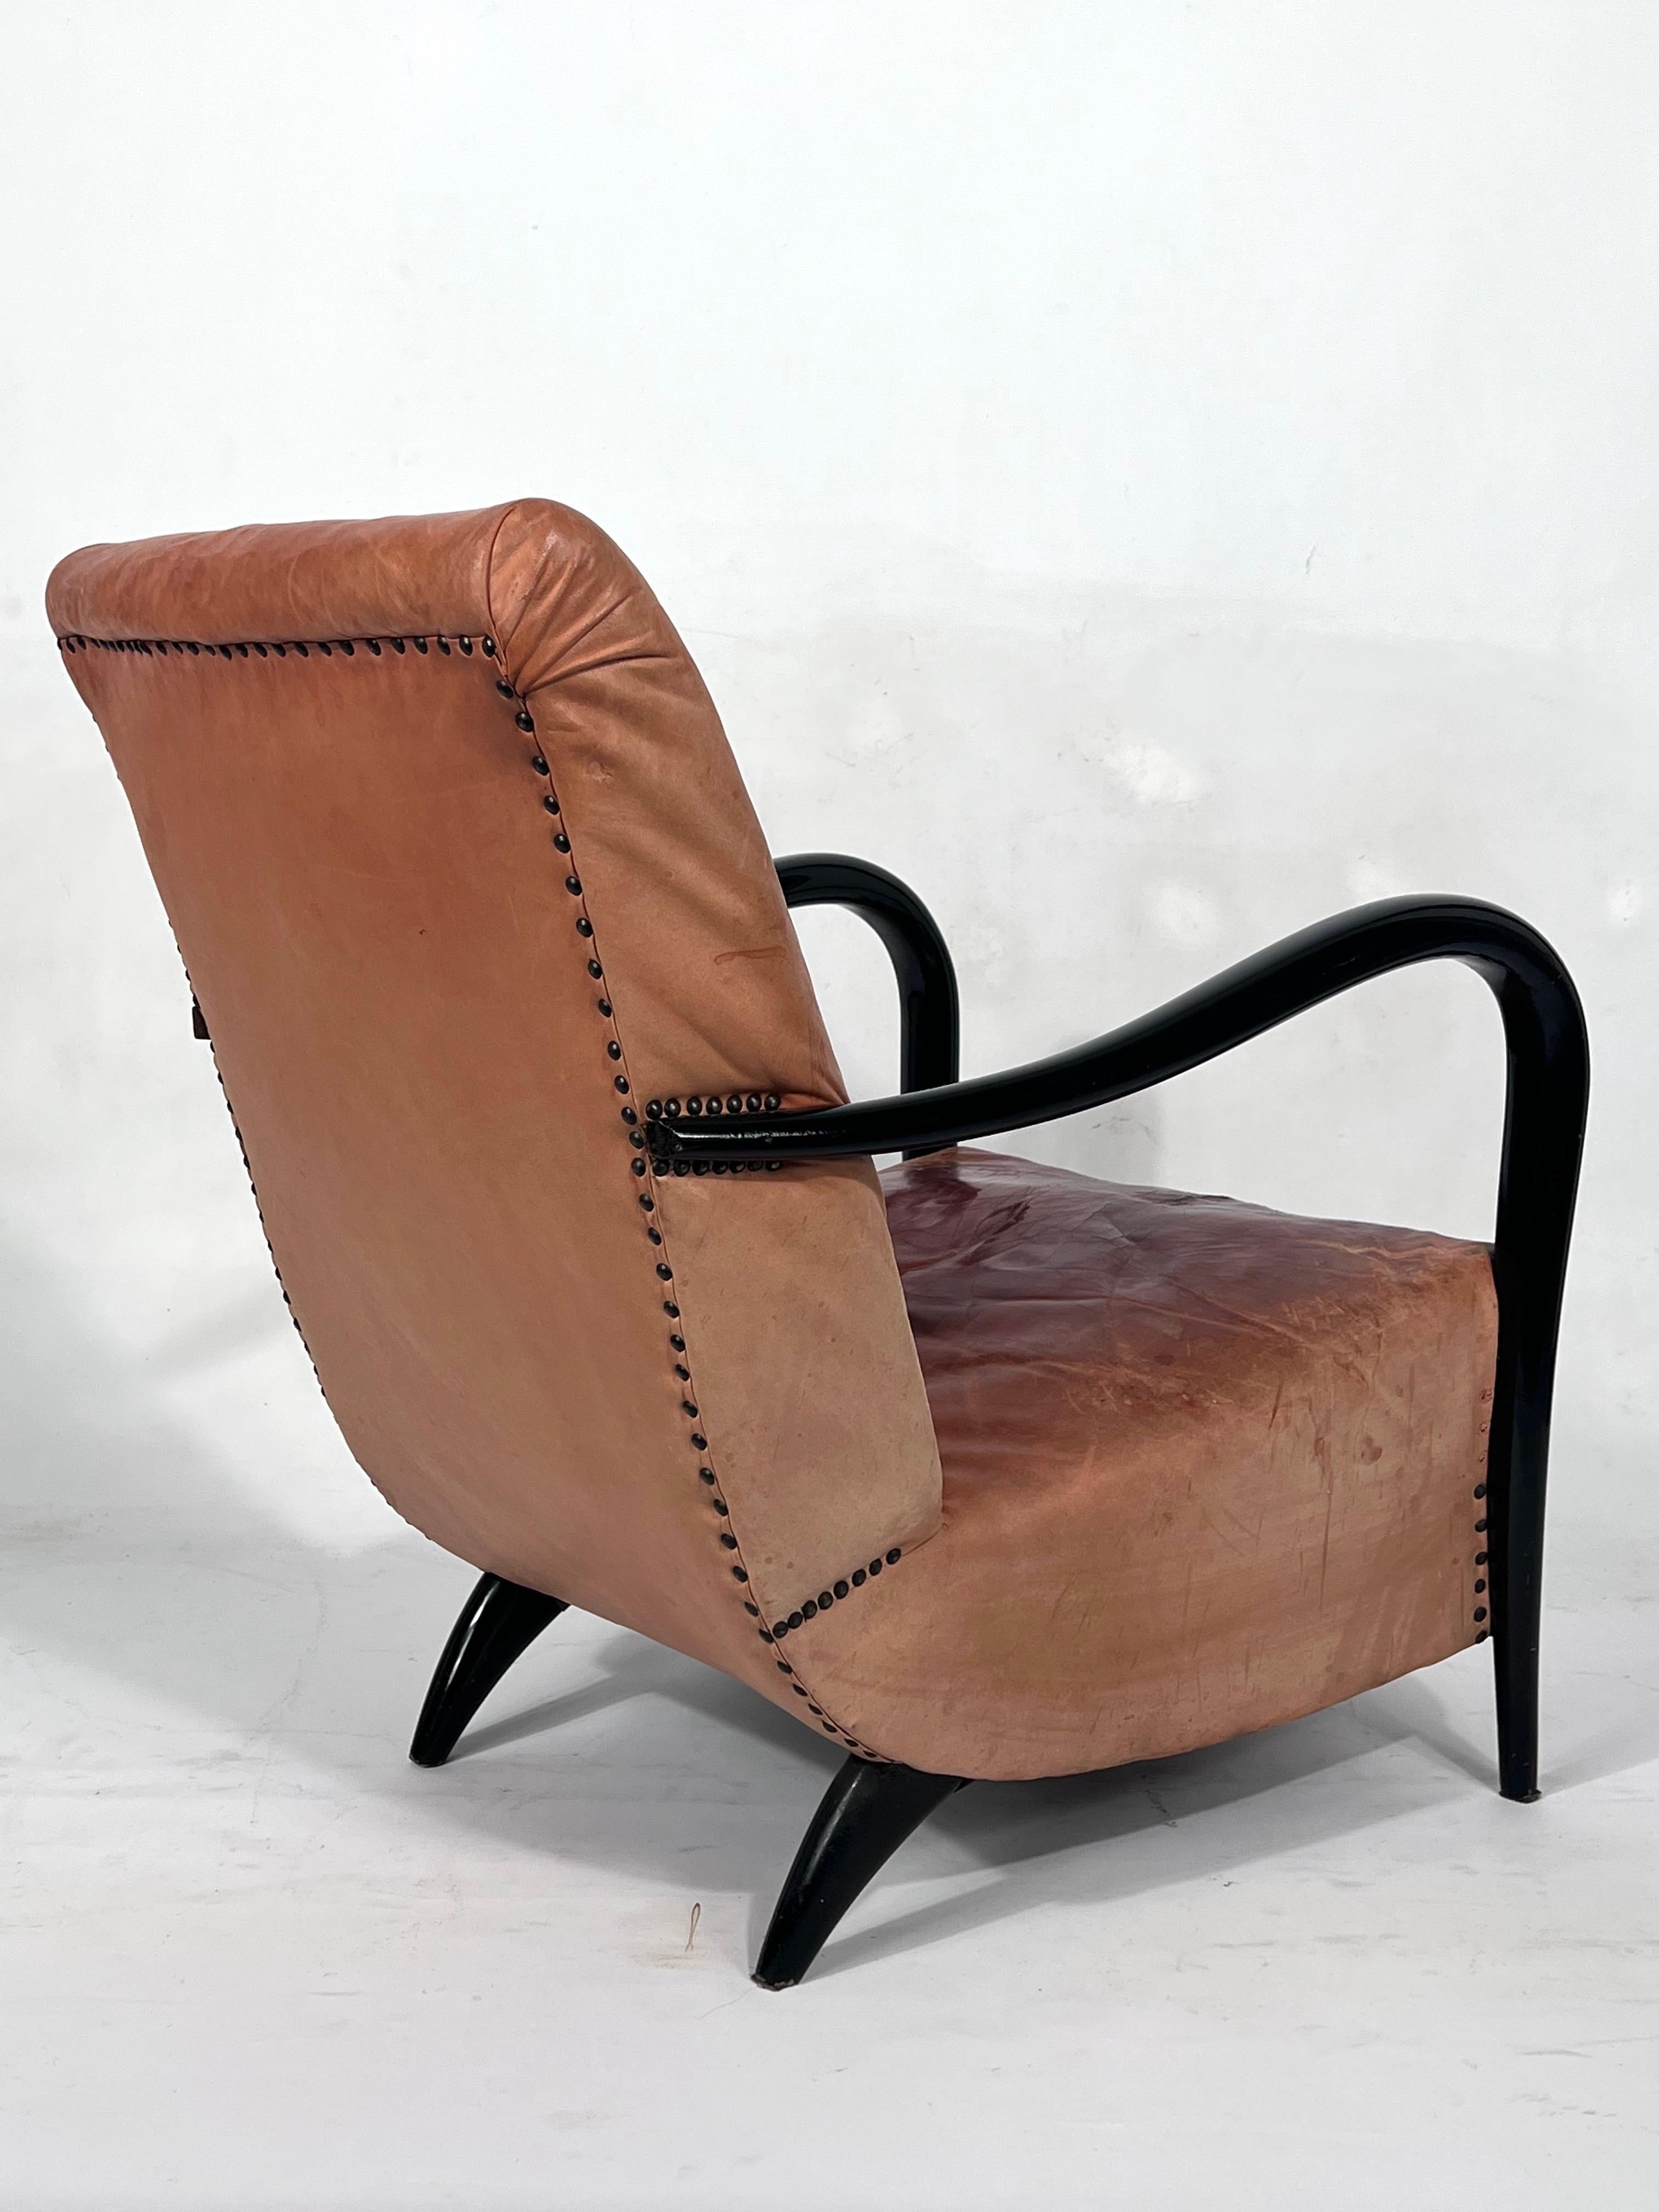 Sculptural Italian Mid-Century Leather and Curved Wood Armchair from 50s For Sale 4